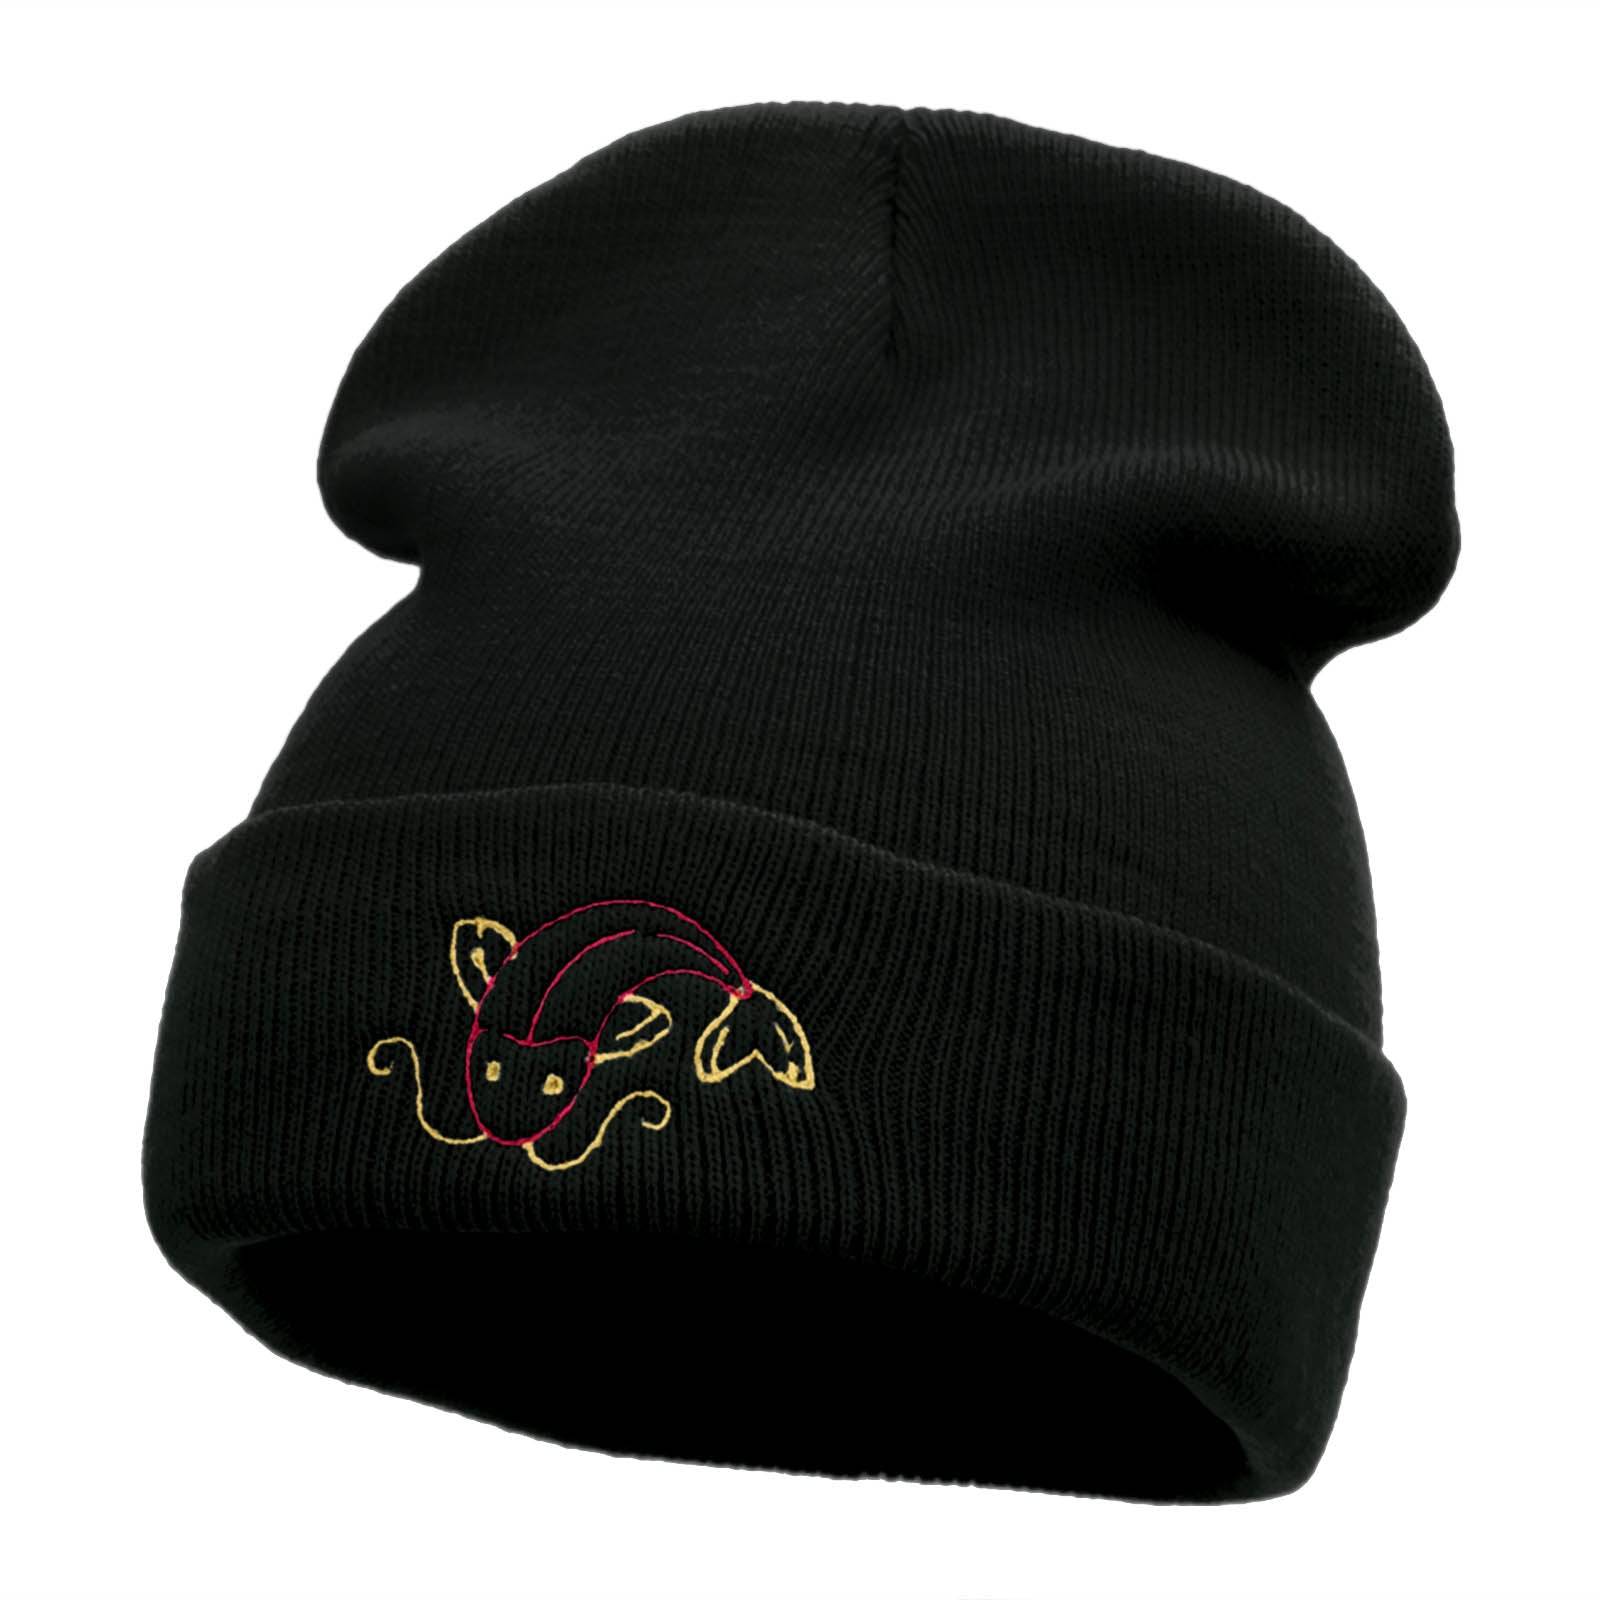 Koi Fish Embroidered 12 Inch Long Knitted Beanie - Black OSFM